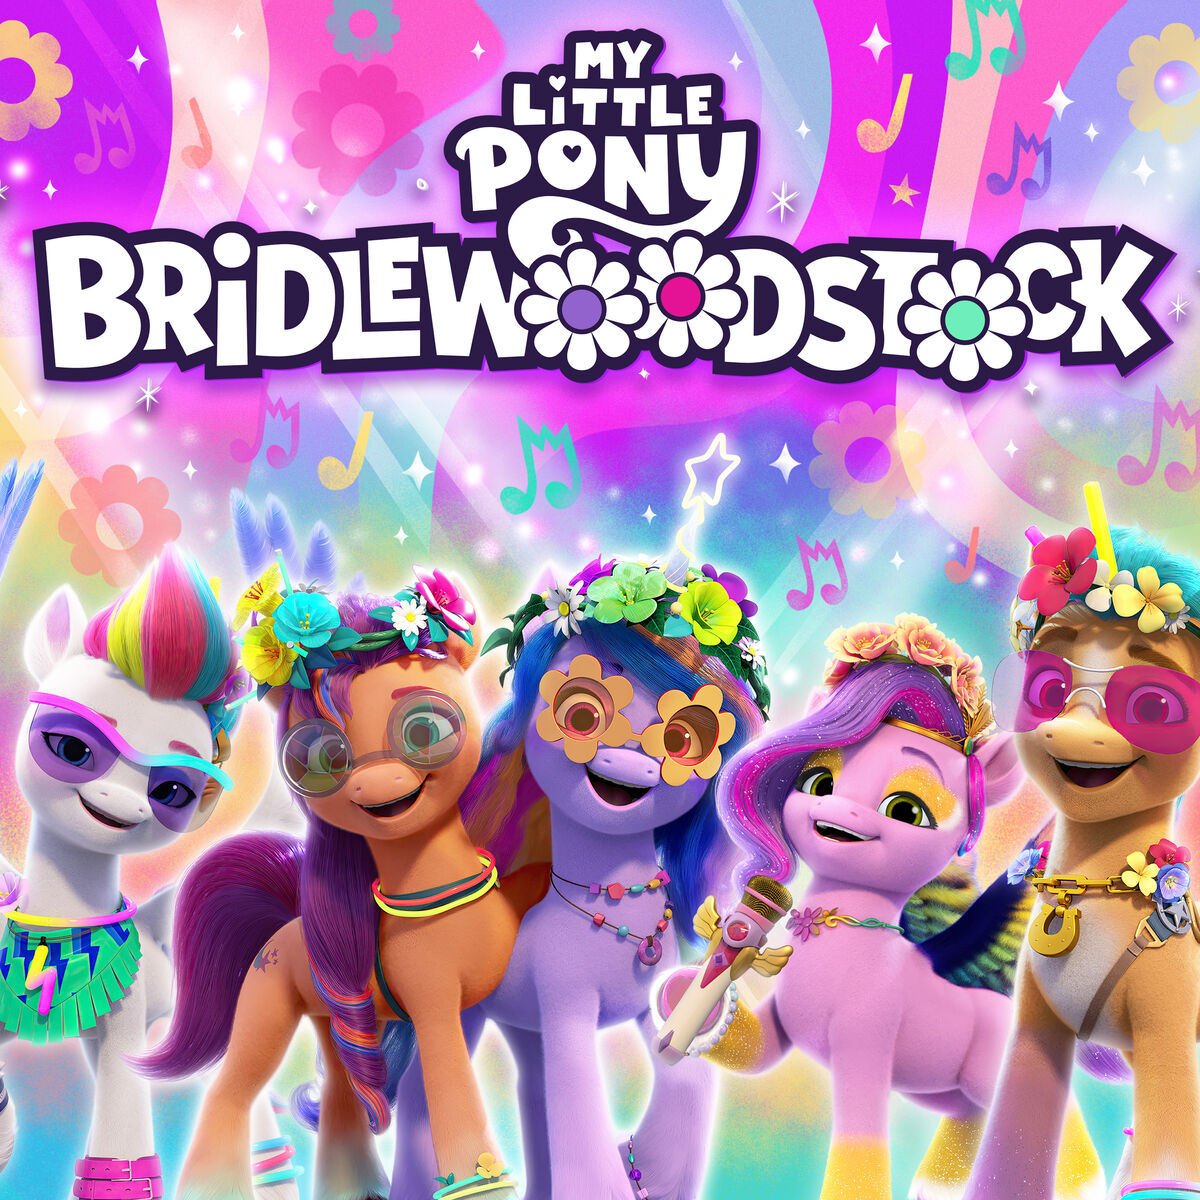 Bridlewoodstock (extended play) | My Little Pony Friendship is Magic ...